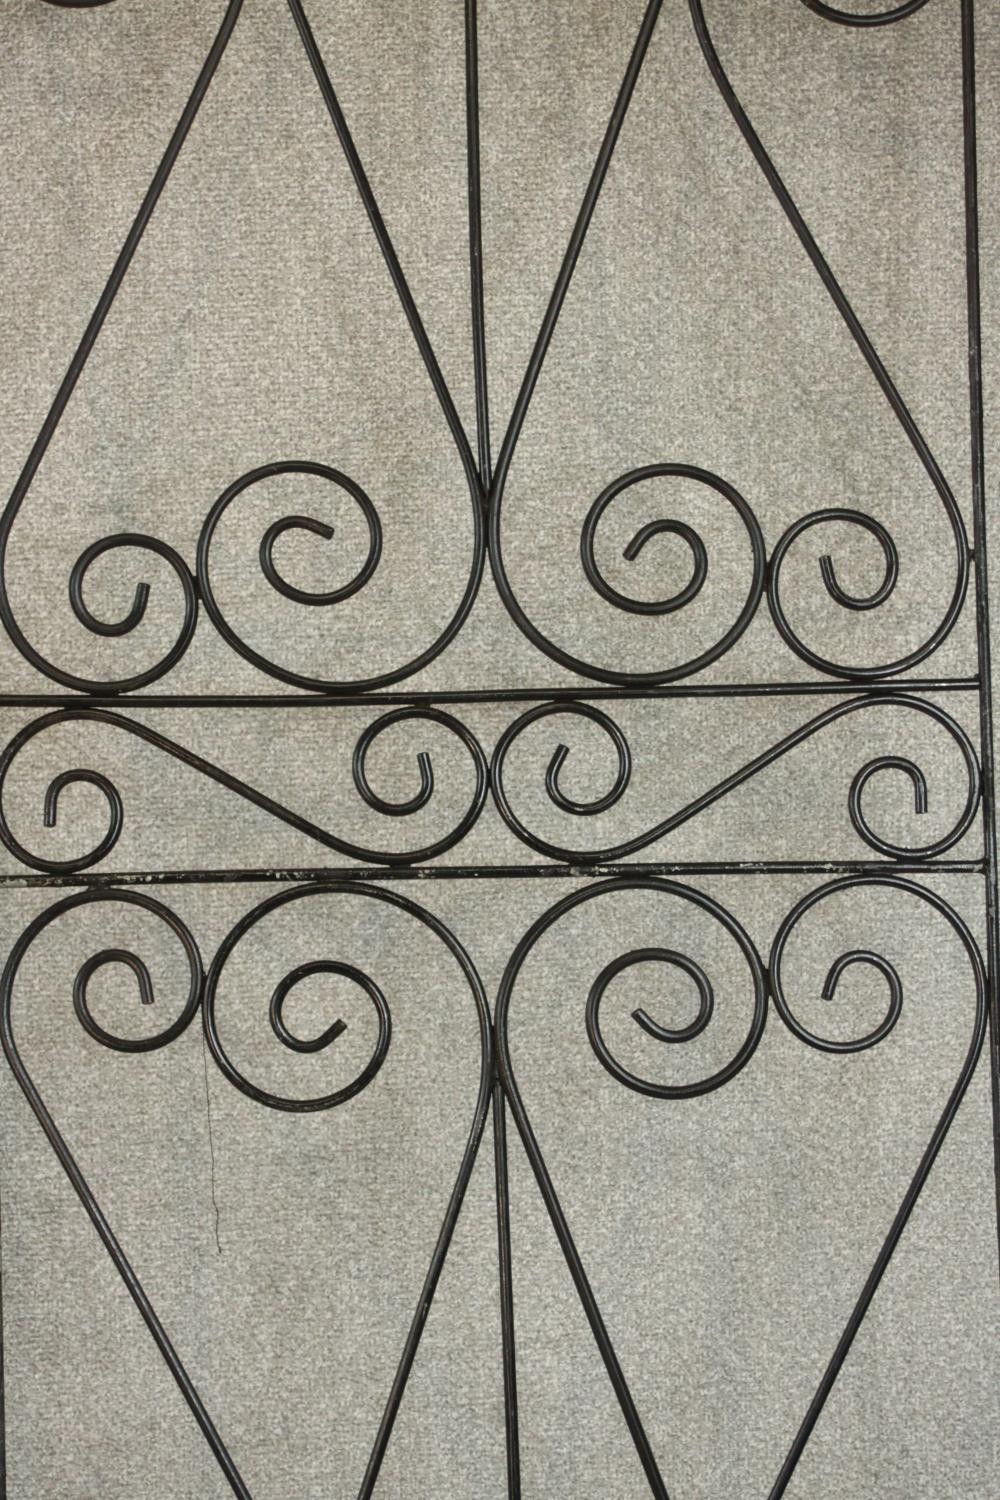 A pair of black painted wrought iron gates, decorated with spiral designs. H.177 W.64cm. (each) - Image 2 of 4